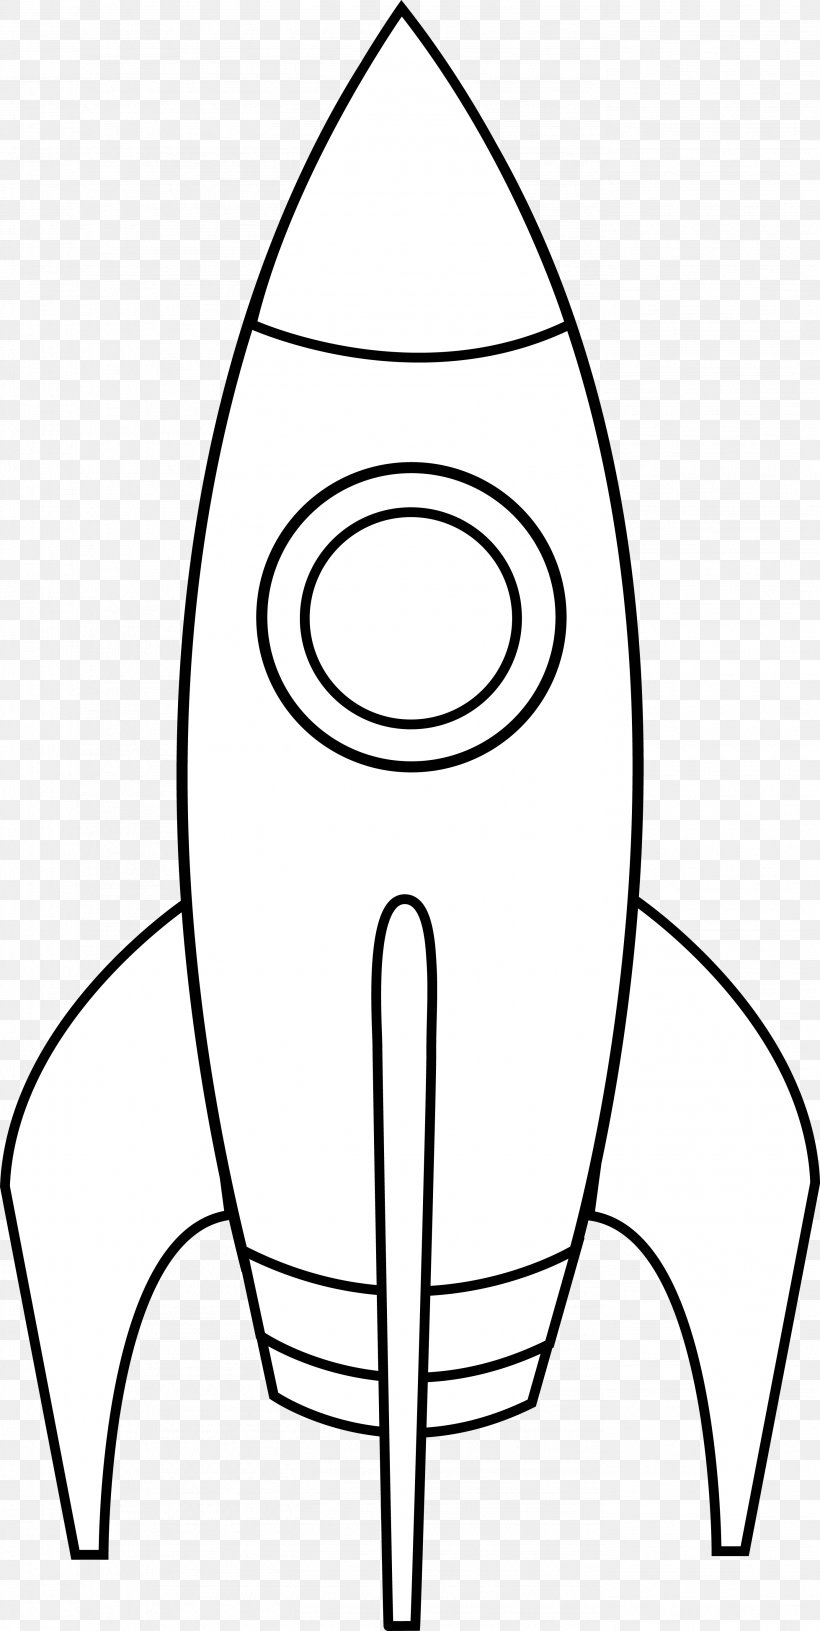 black-and-white-spaceship-clipart-clip-art-library